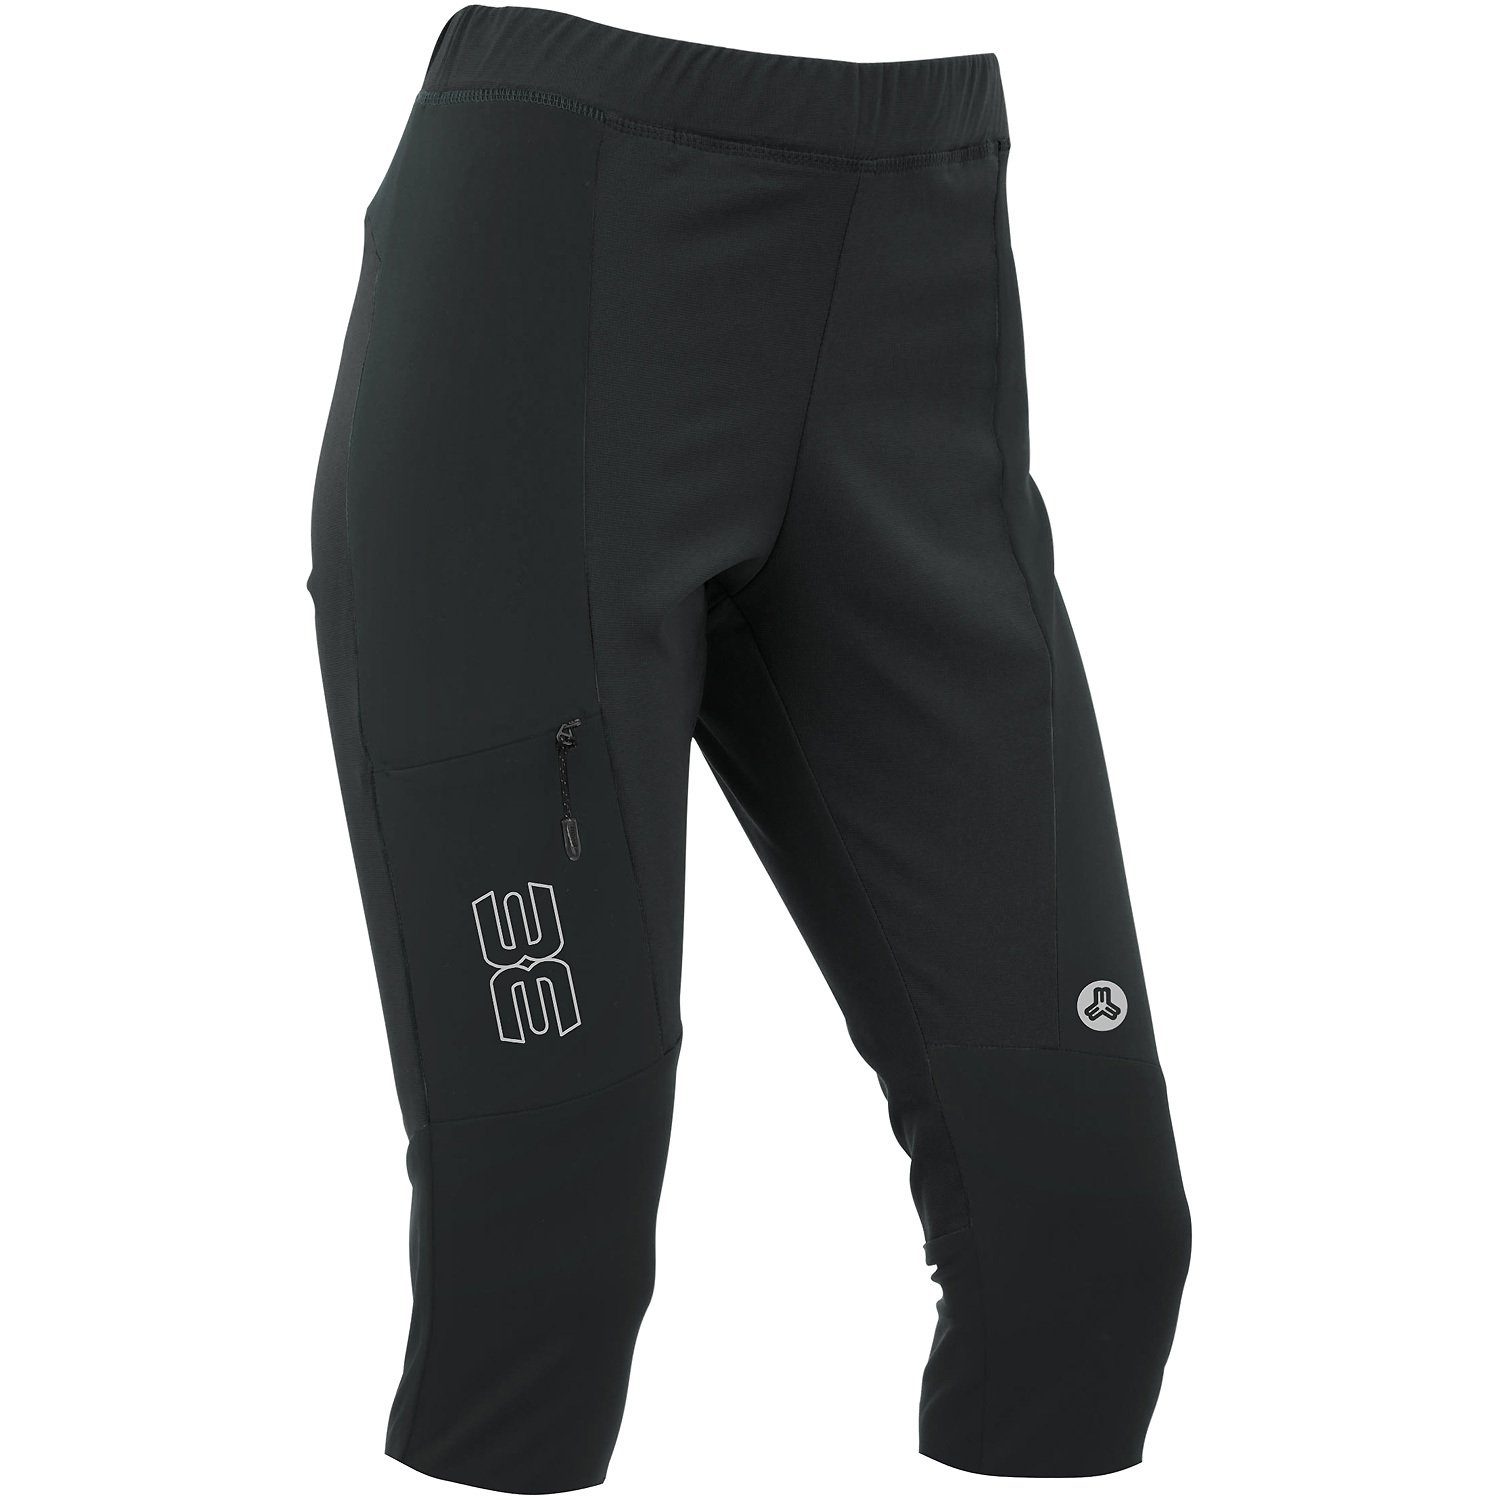 Maul Sport® Funktionshose Outdoorhose Simssee